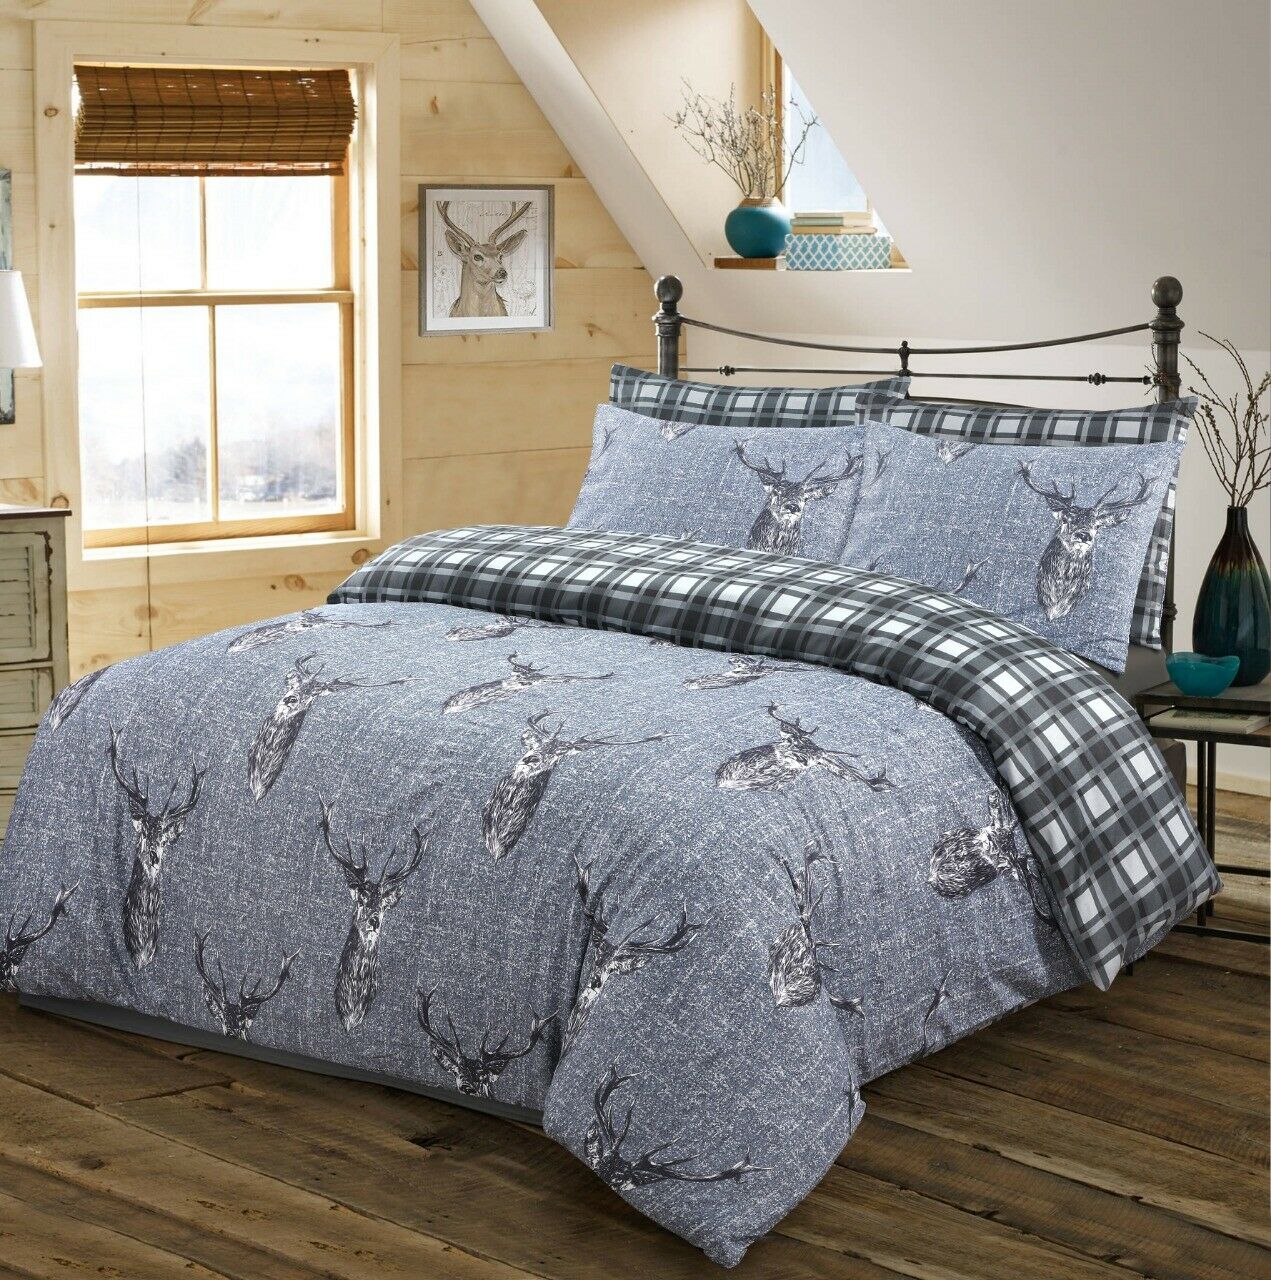 Stag Duvet Cover With Pillow Cases 100% Cotton Quilt Covers Bedding Se –  Threadnine